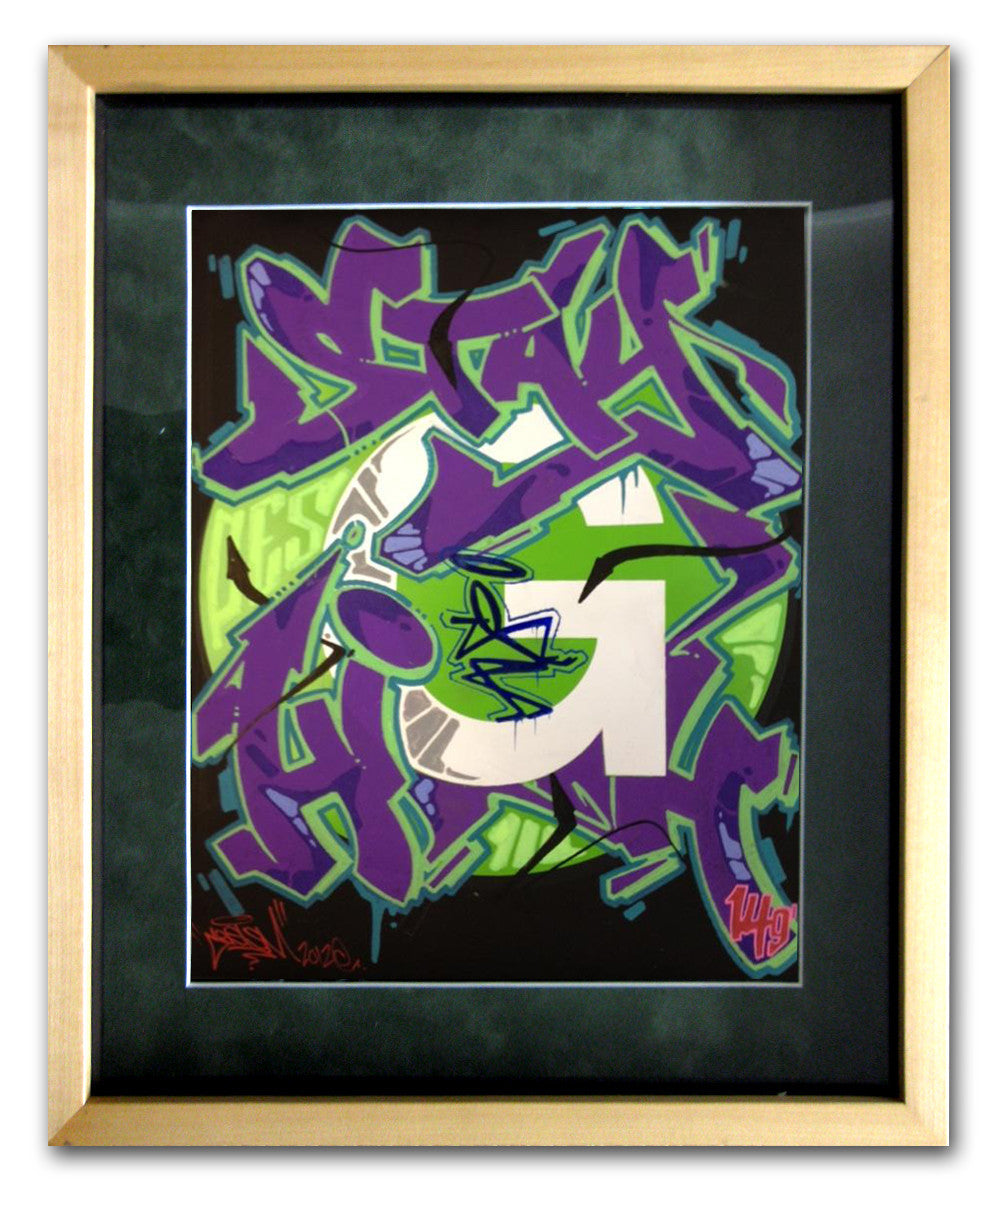 CES ONE -  "Stayhigh" Painting